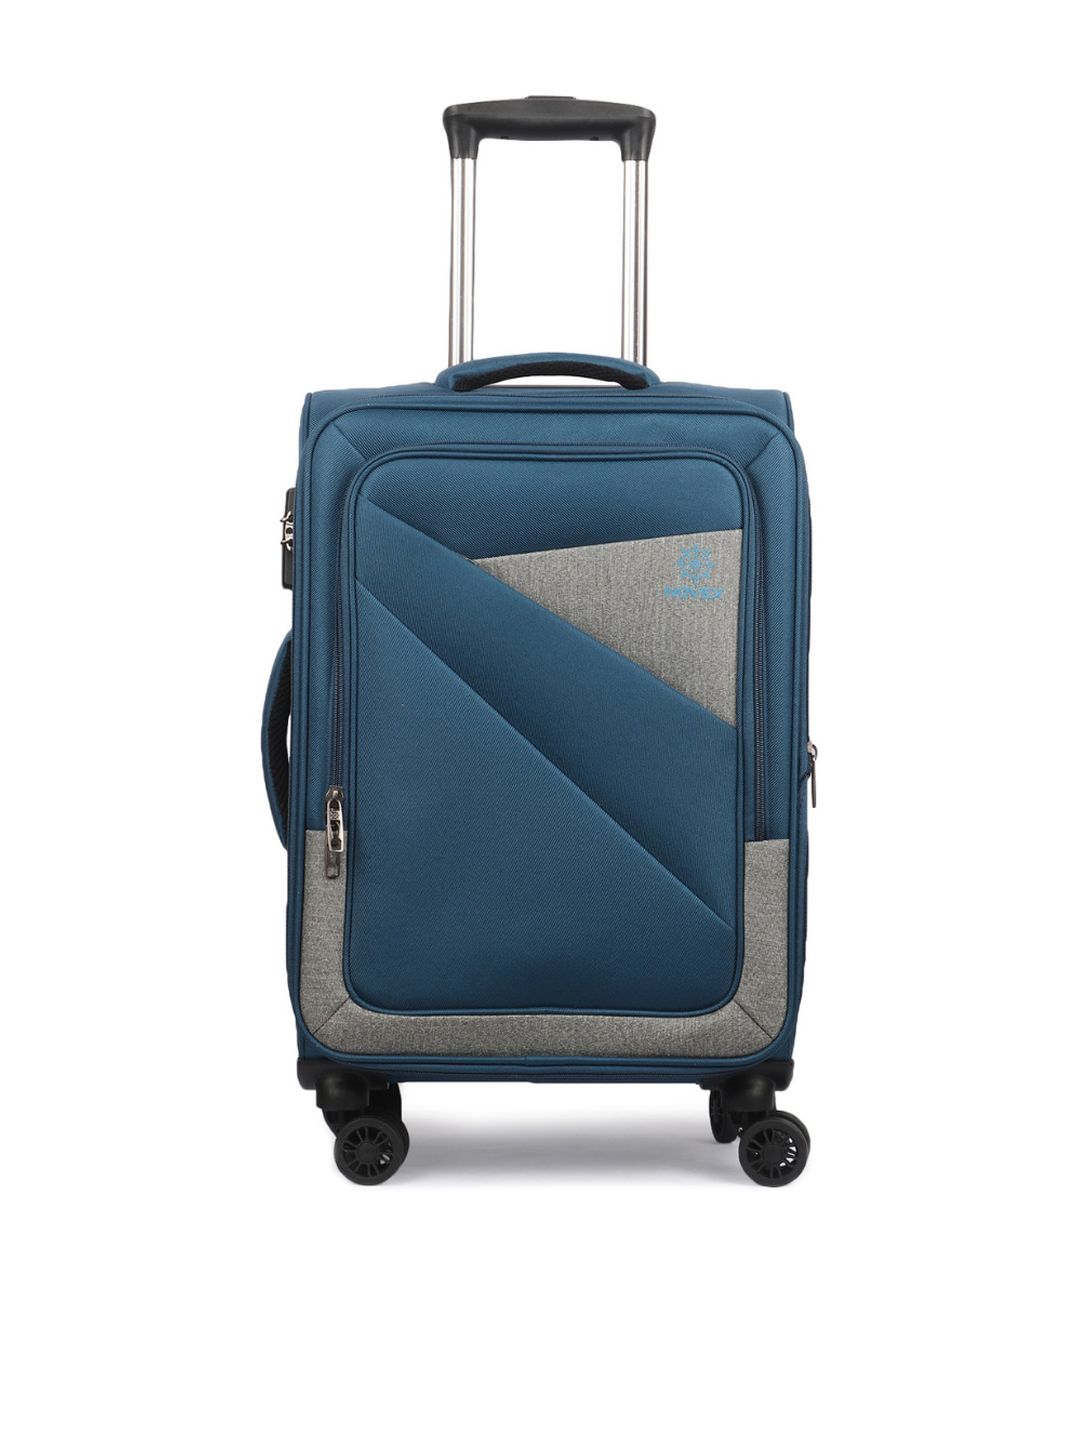 NOVEX Blue & Grey Colourblocked Soft-Sided Trolley Bag Price in India